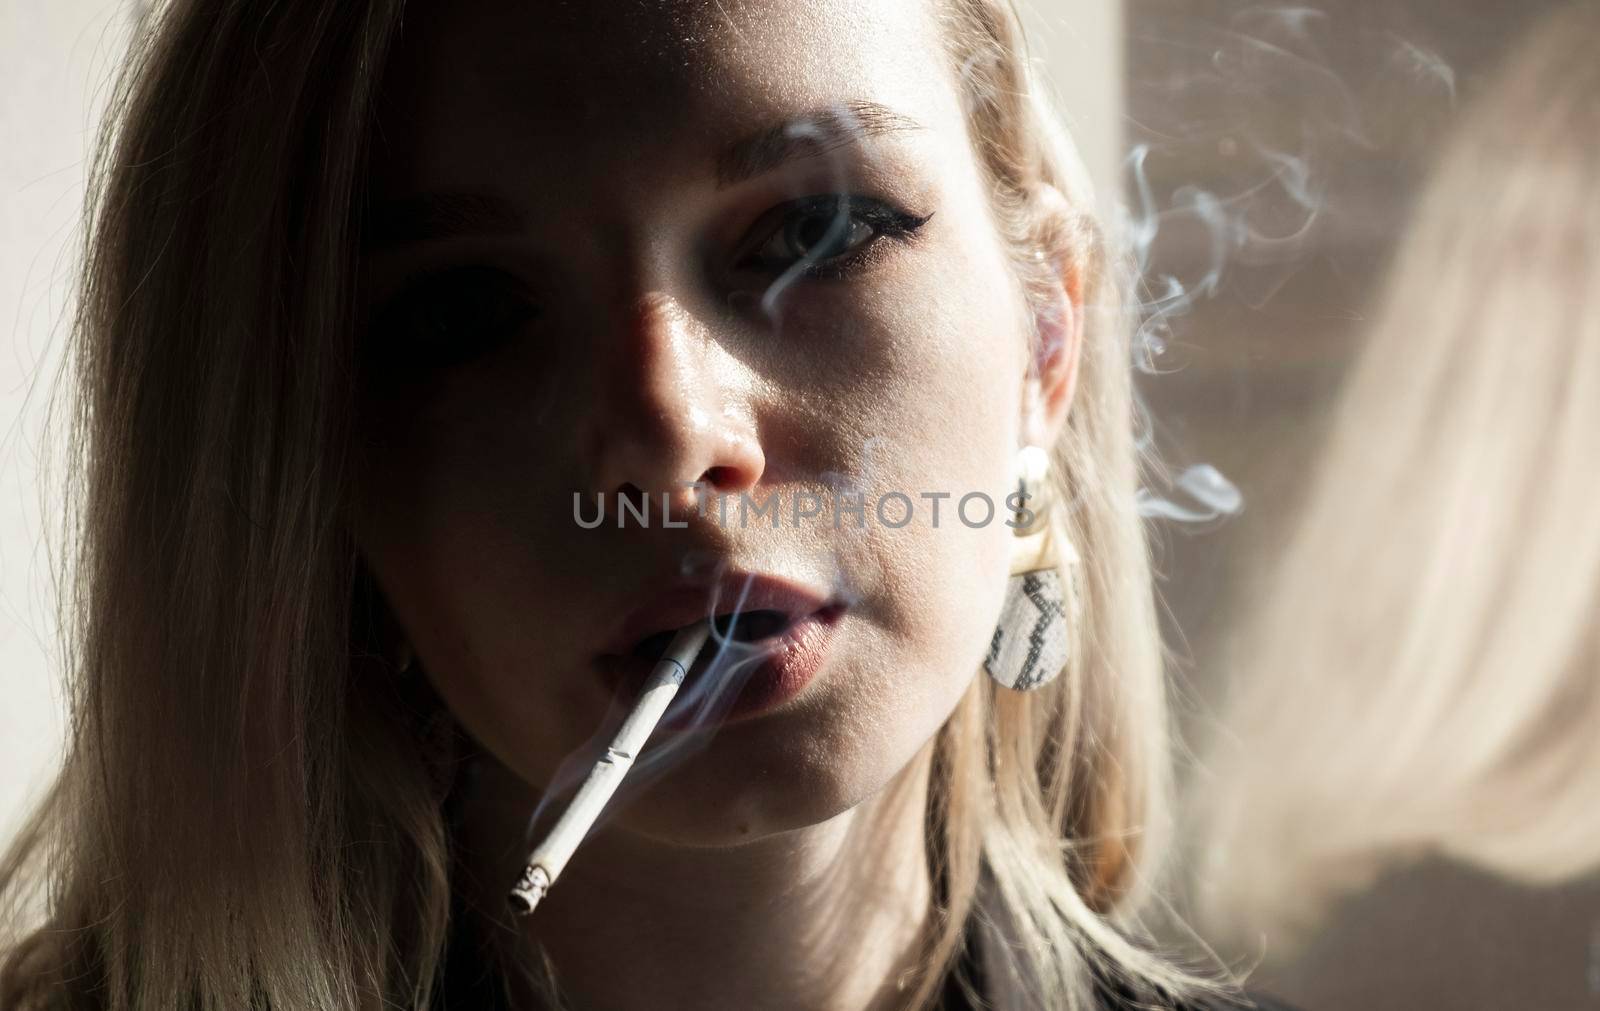 Young Woman Smoking Cigarette by snep_photo